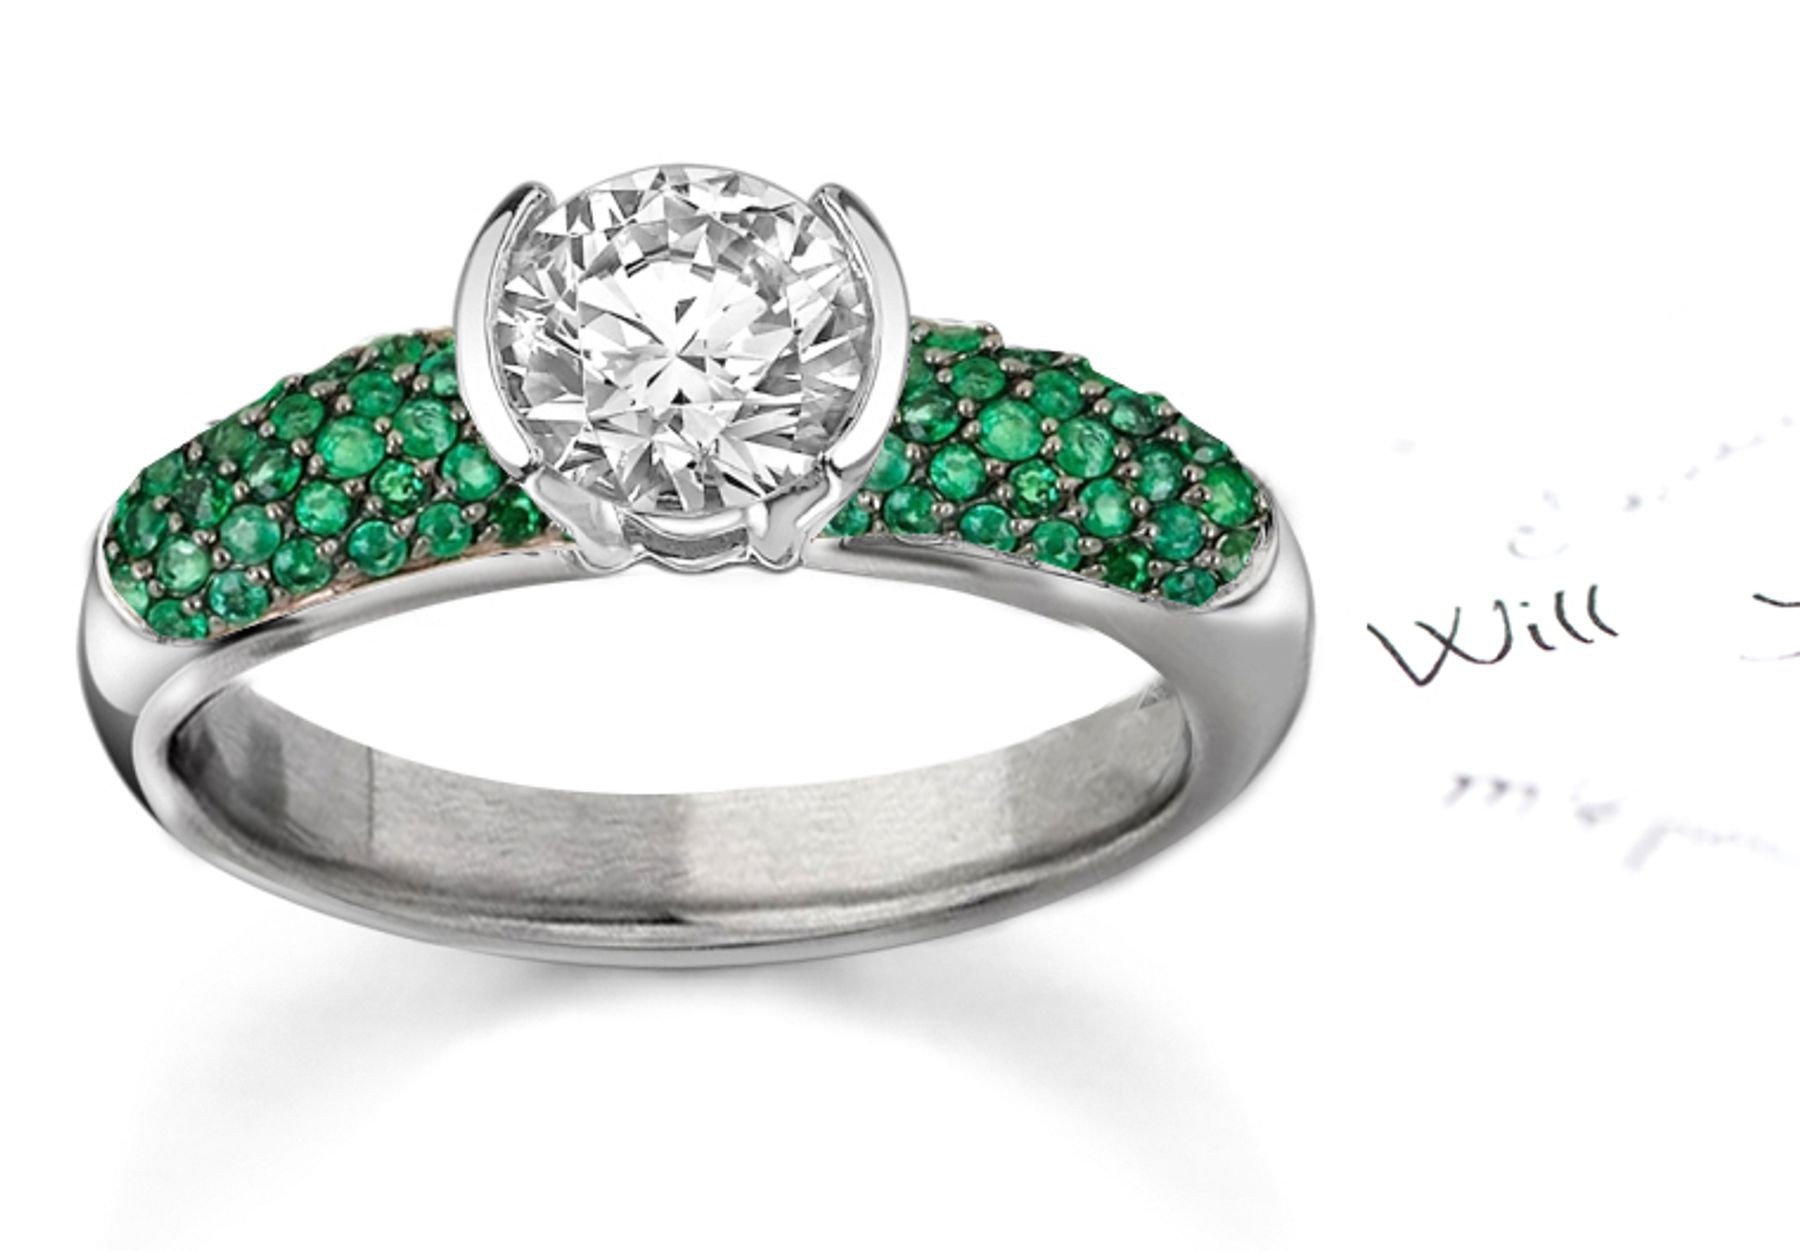 FRENCH COLLECTION: Diamond & French Micropave Emerald Solitaire Ring